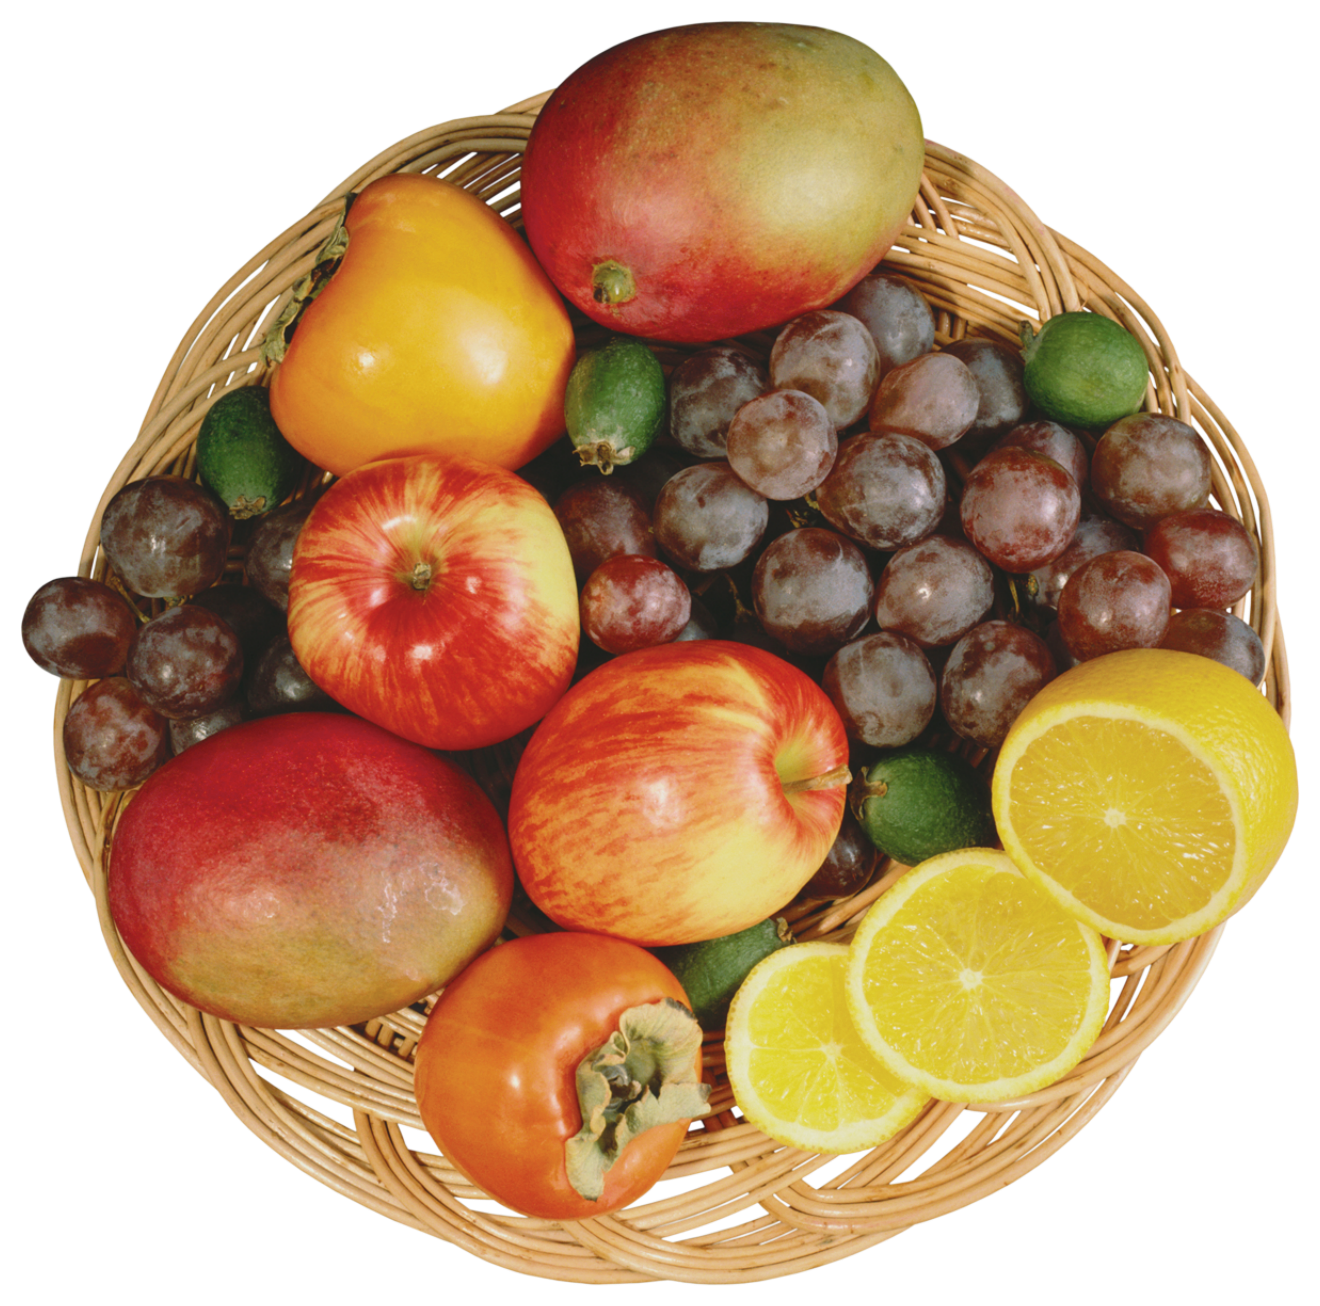 Mixed Fruits in Wicker Bowl PNG Clipart - Best WEB Clipart